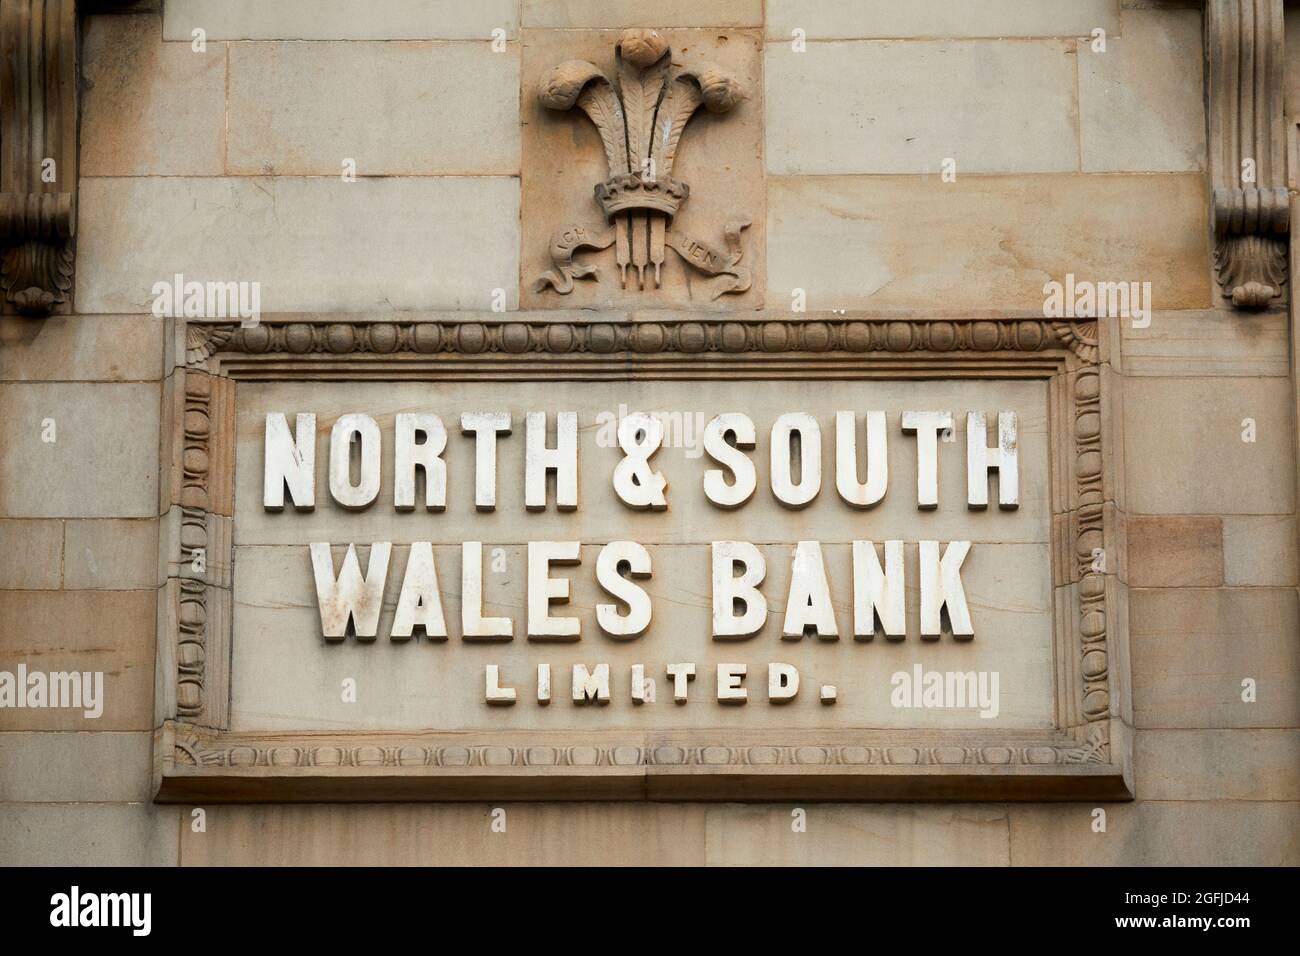 North and South Wales Bank Limited on the HSBC bank Colwyn Bay Stock Photo